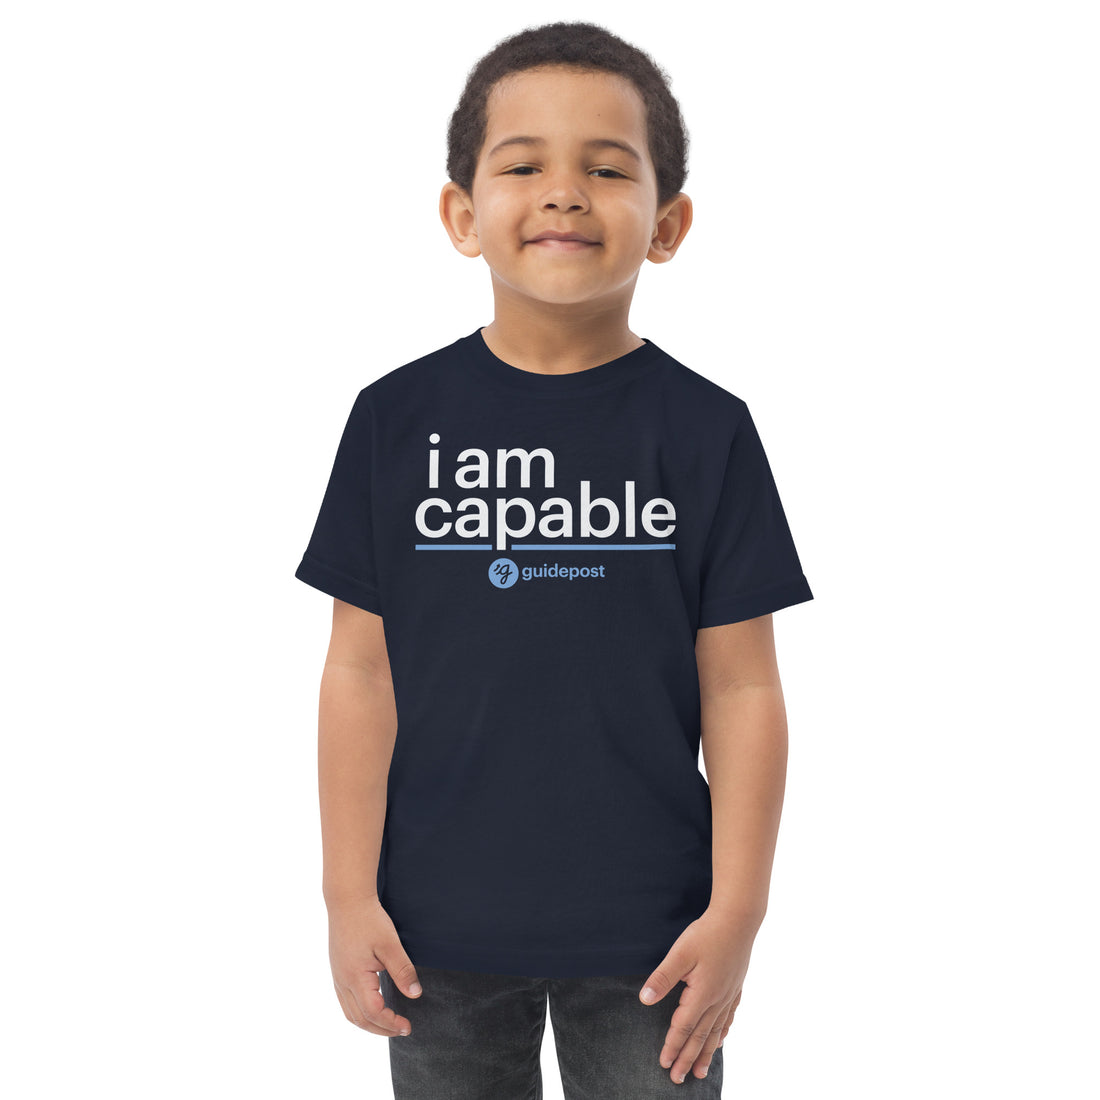 Guidepost Apparel - I am Capable Toddler jersey t-shirt